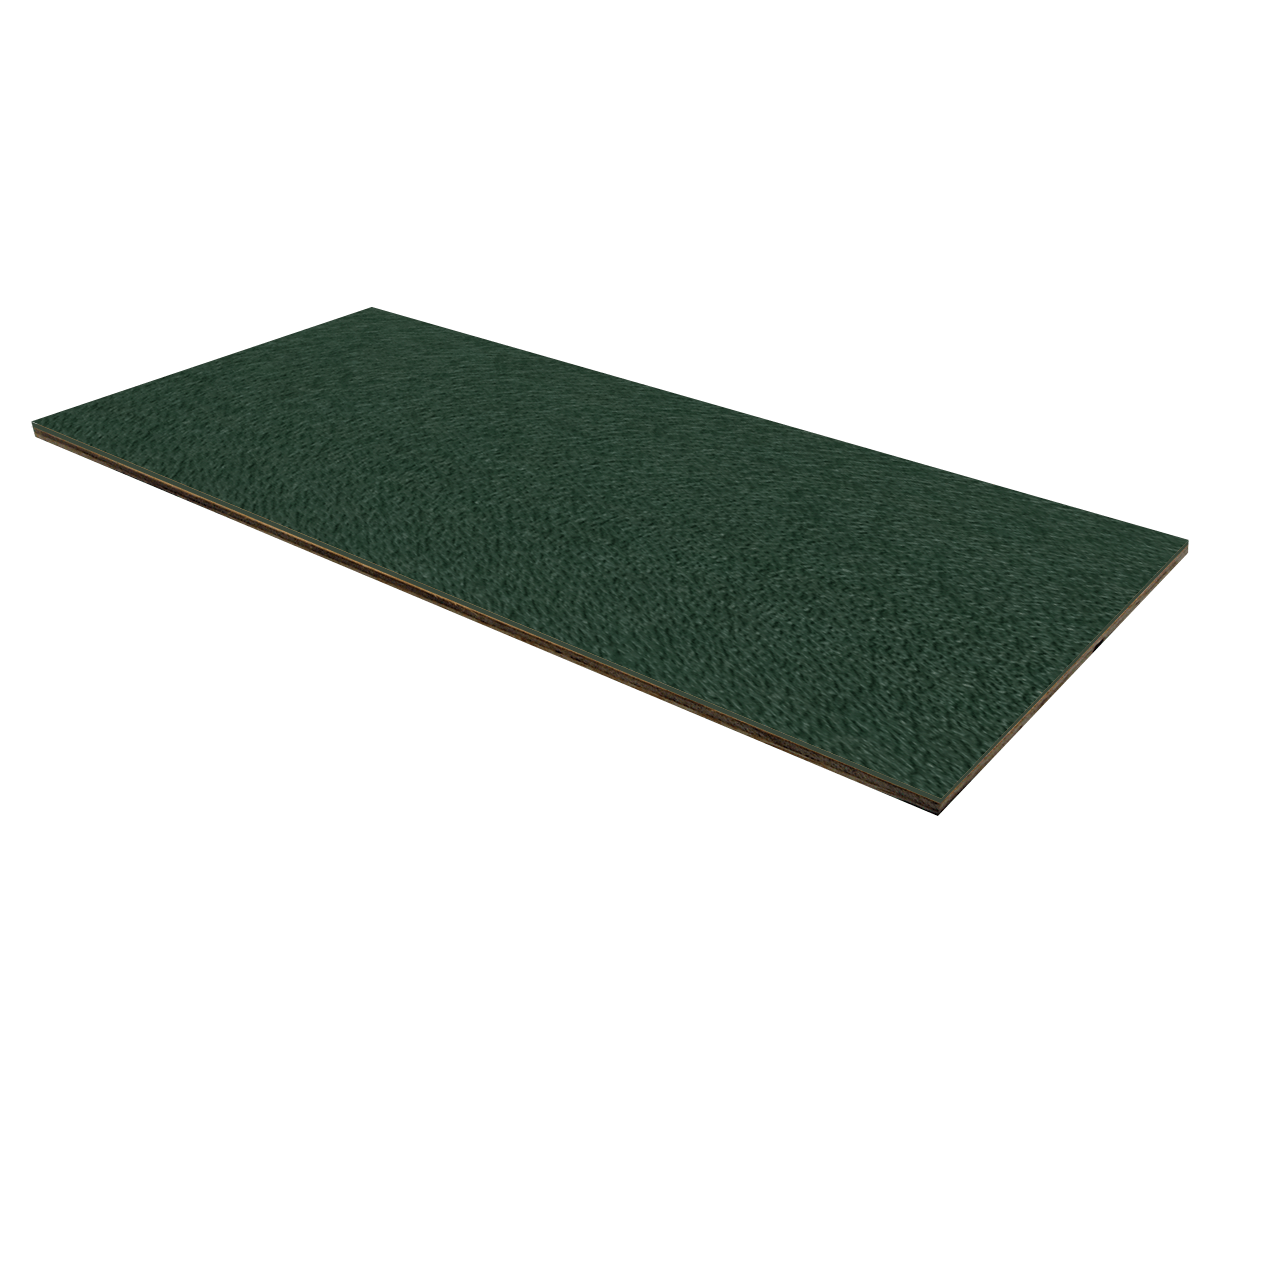 1/8" Luan Plywood ABS Laminate - Forest Green